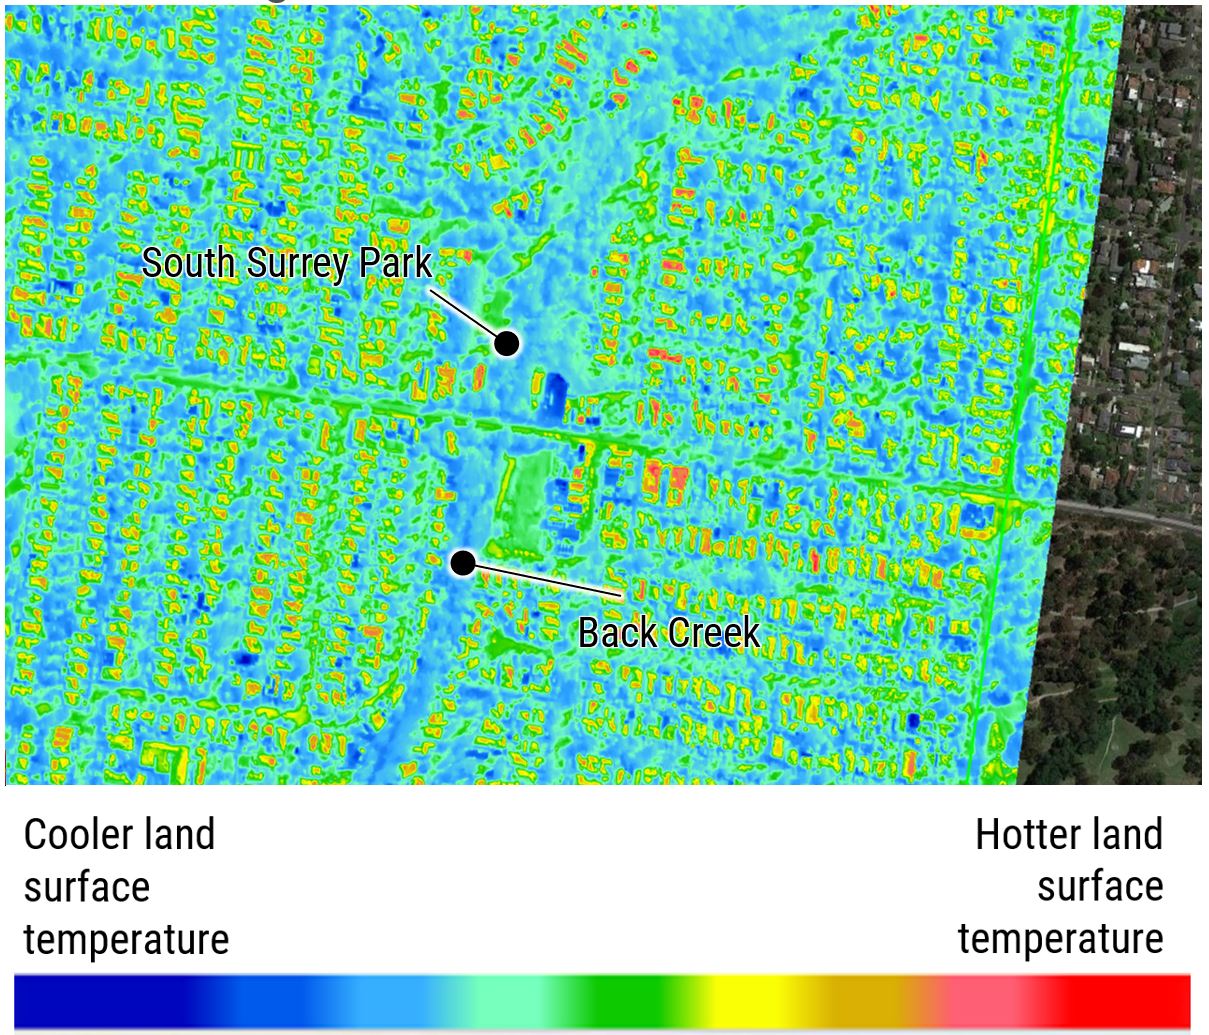 Aerial image of land in Boroondara depicted in a blue to red scale showing cooler or warmer land surface temperatures. The roofs of buildings appear to be the hottest surfaces. A blue-green strip of land along Back Creek is evident.